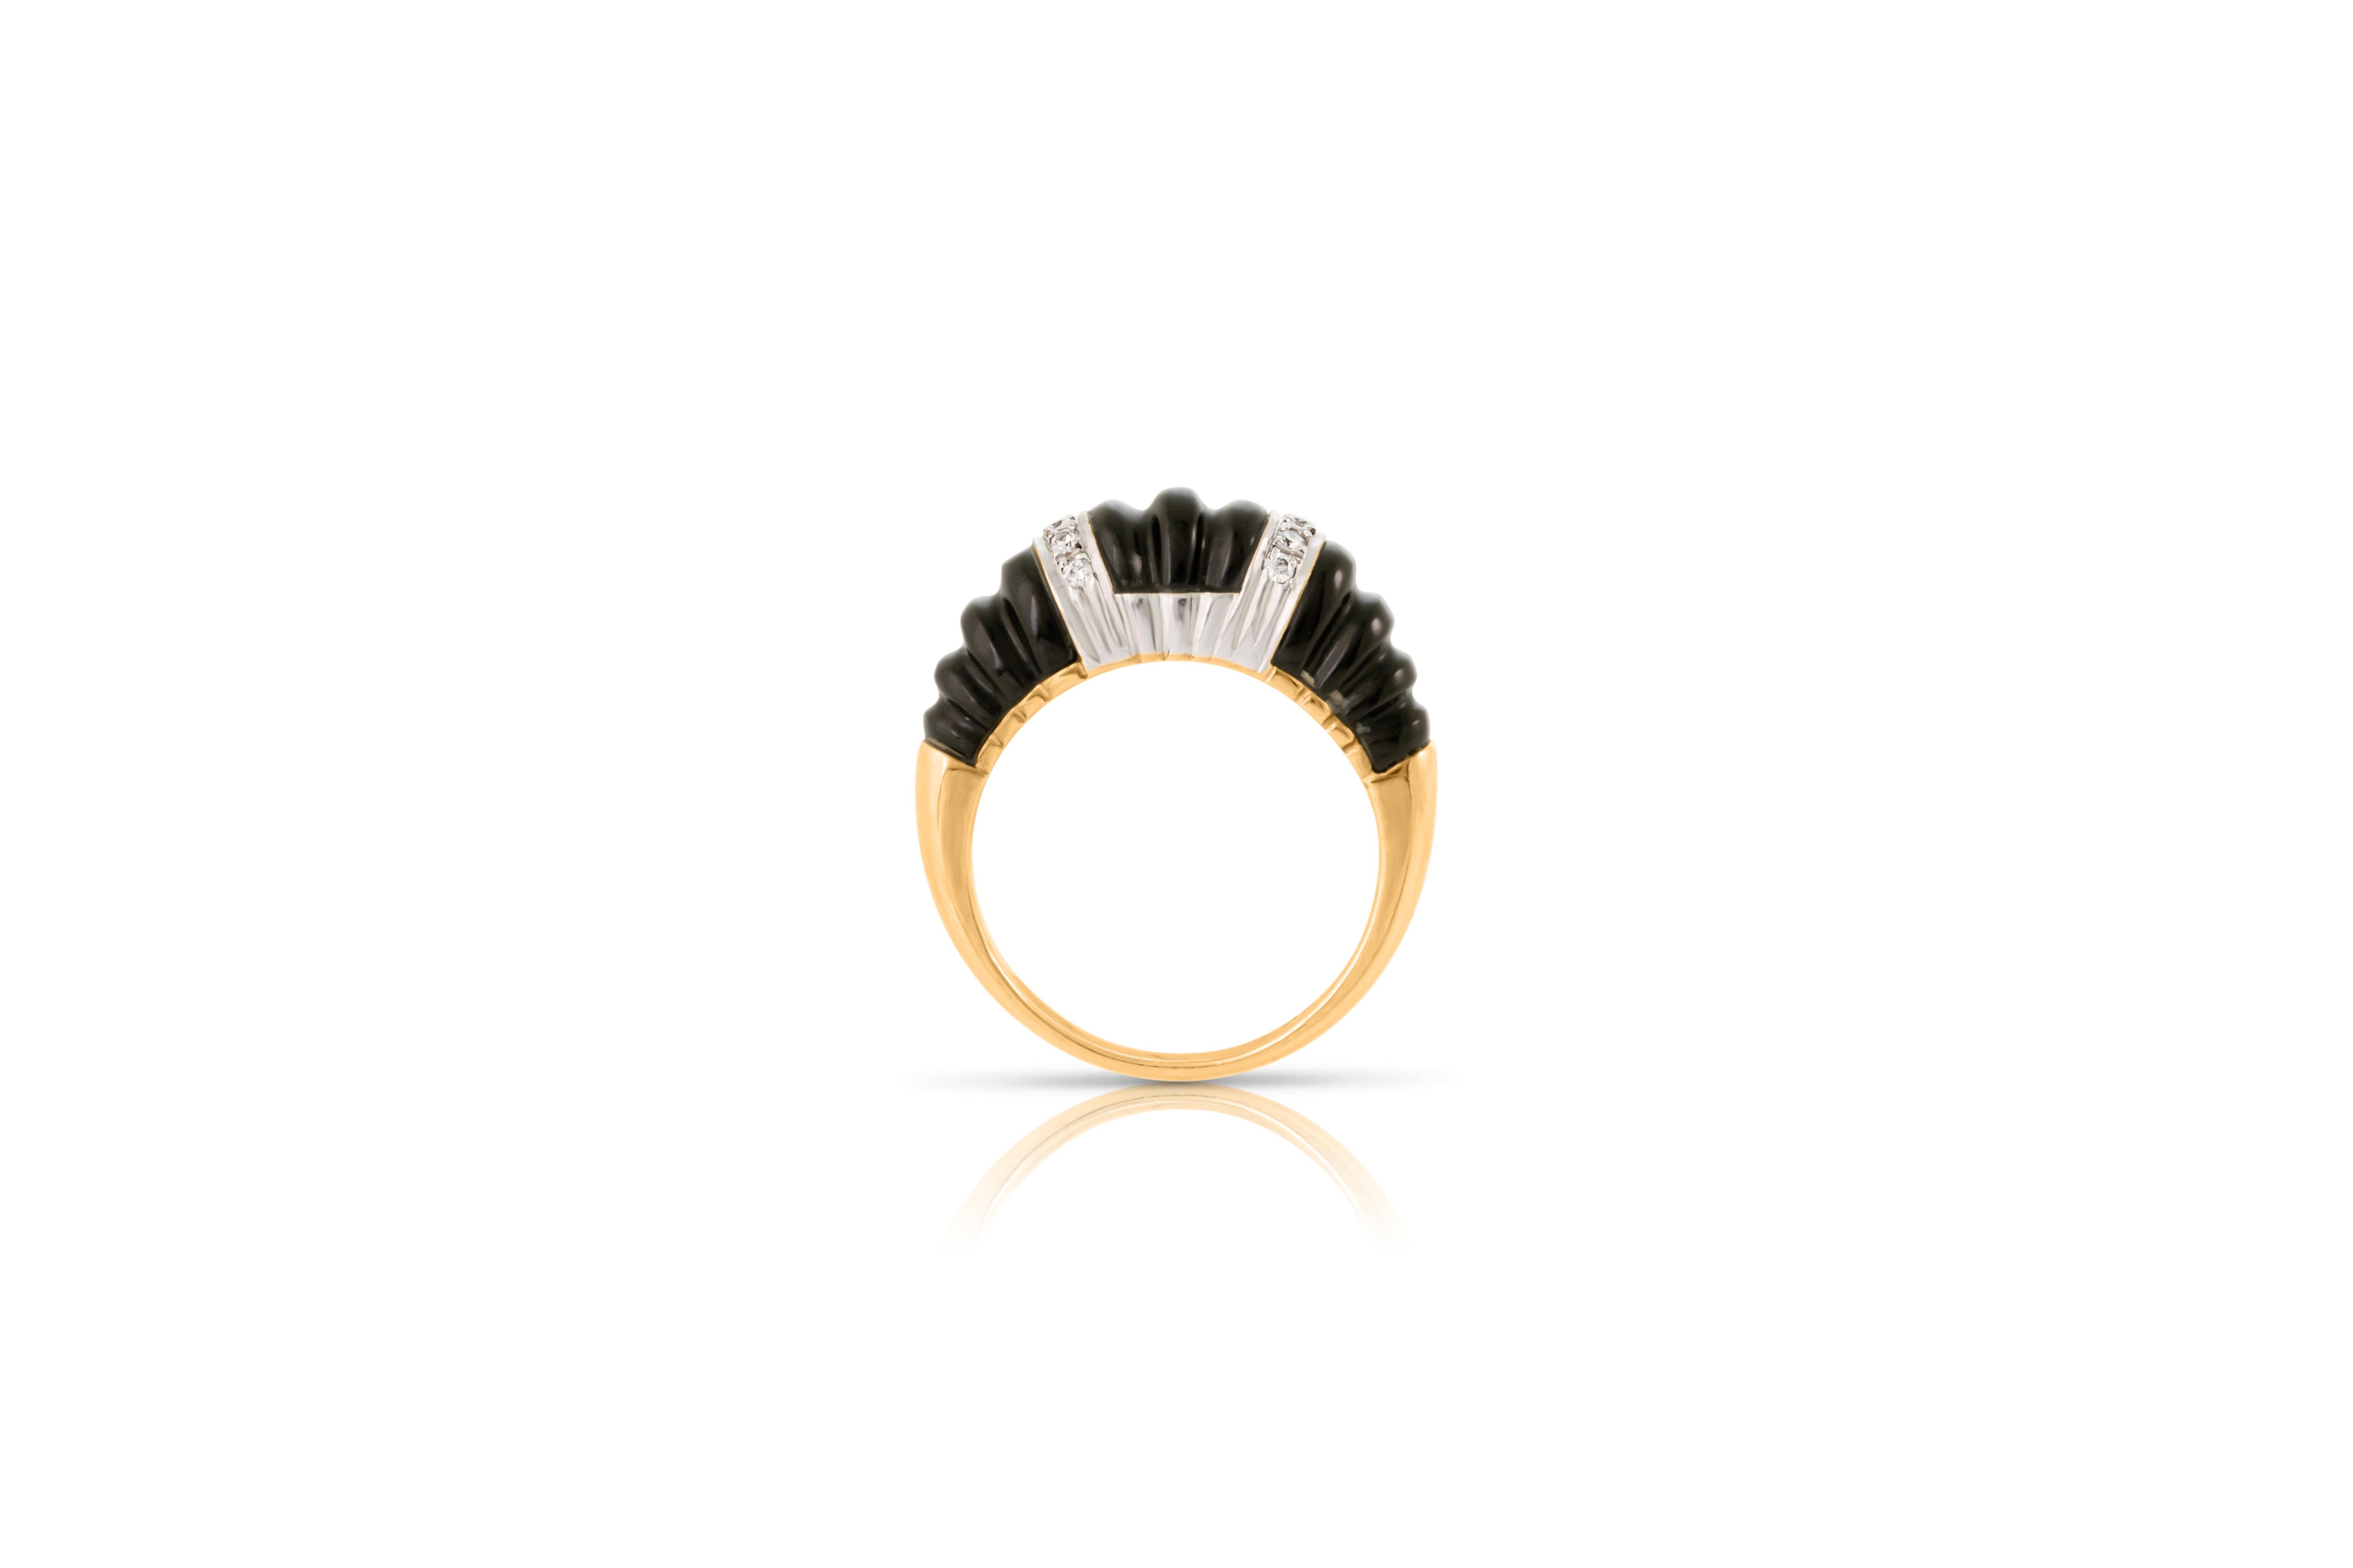 This petite dome ring is a true vintage delicacy with an ageless flair, ready to be added to your easy-to-wear-any-day collection. Sleekly rendered in rich 14ct gold, the thin band leads to a high-profile dome made of carved black onyx, giving depth